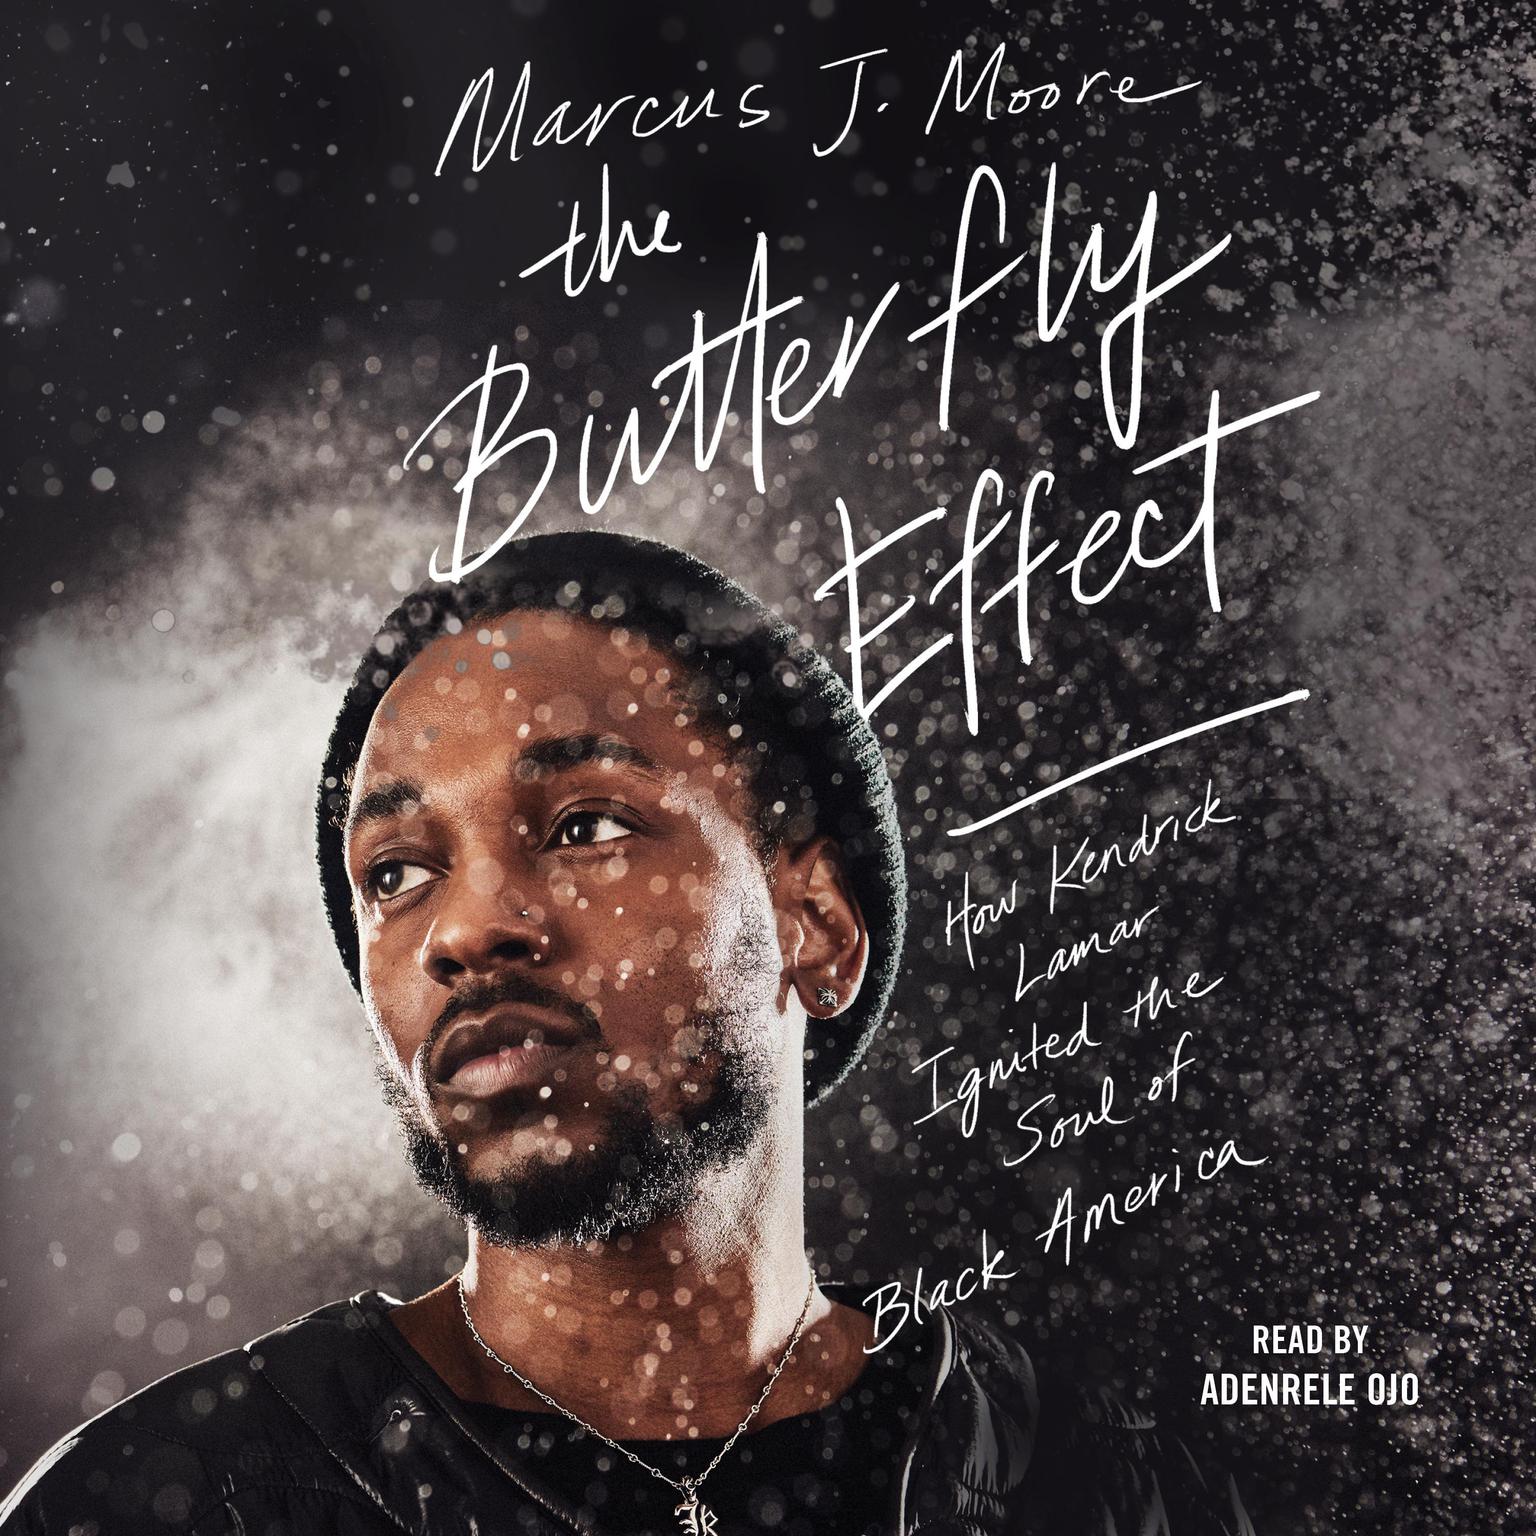 The Butterfly Effect: How Kendrick Lamar Ignited the Soul of Black America Audiobook, by Marcus J. Moore